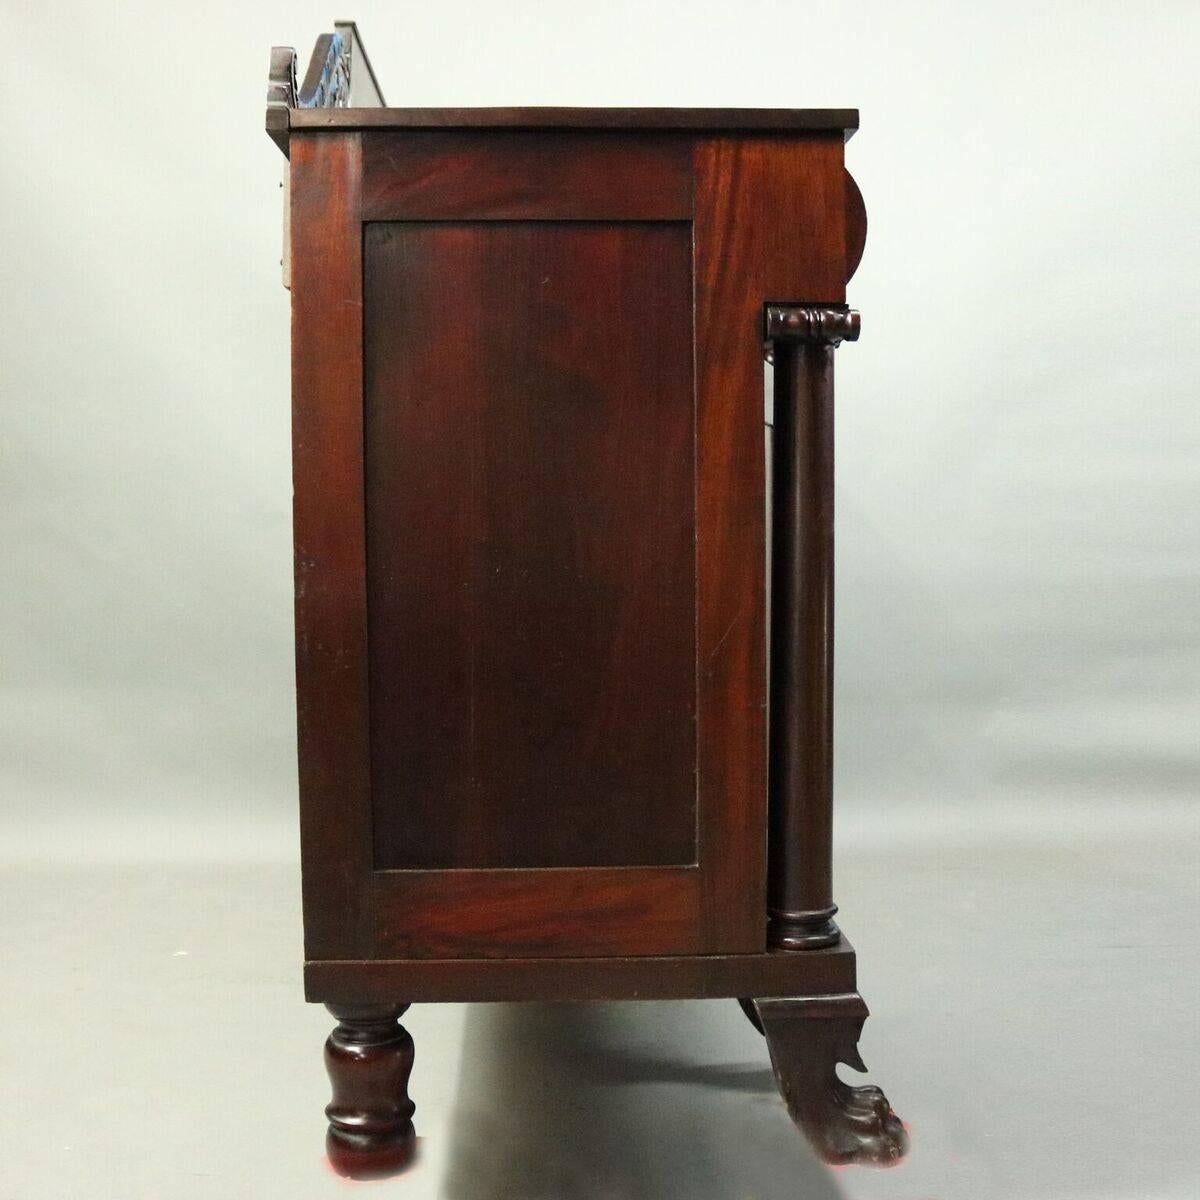 Antique American Empire Philadelphia Quervelle School sideboard features mahogany construction with acanthus carved backsplash, full columns with volute caps and stepped bases, carved acanthus and paw feet, convex upper drawers, circa